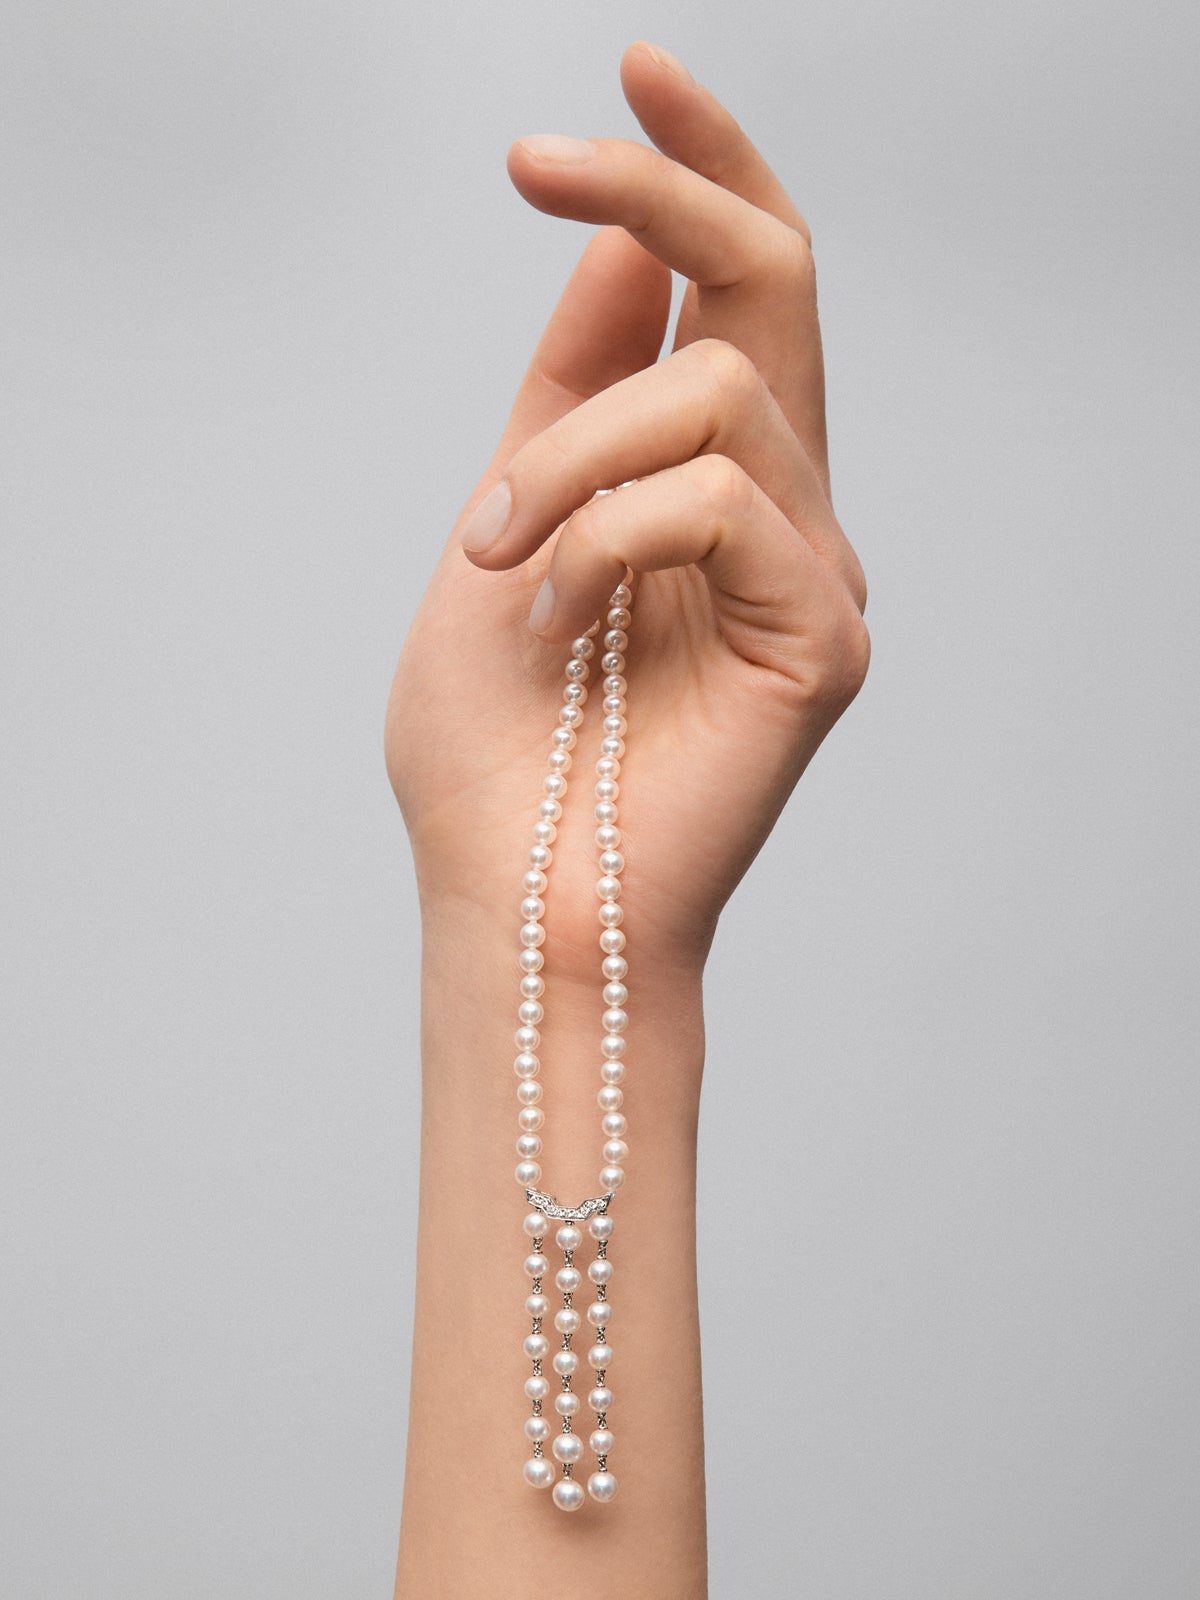 18K white gold pendant with 172 Akoya pearls and 9 brilliant-cut diamonds with a total of 0.09 cts